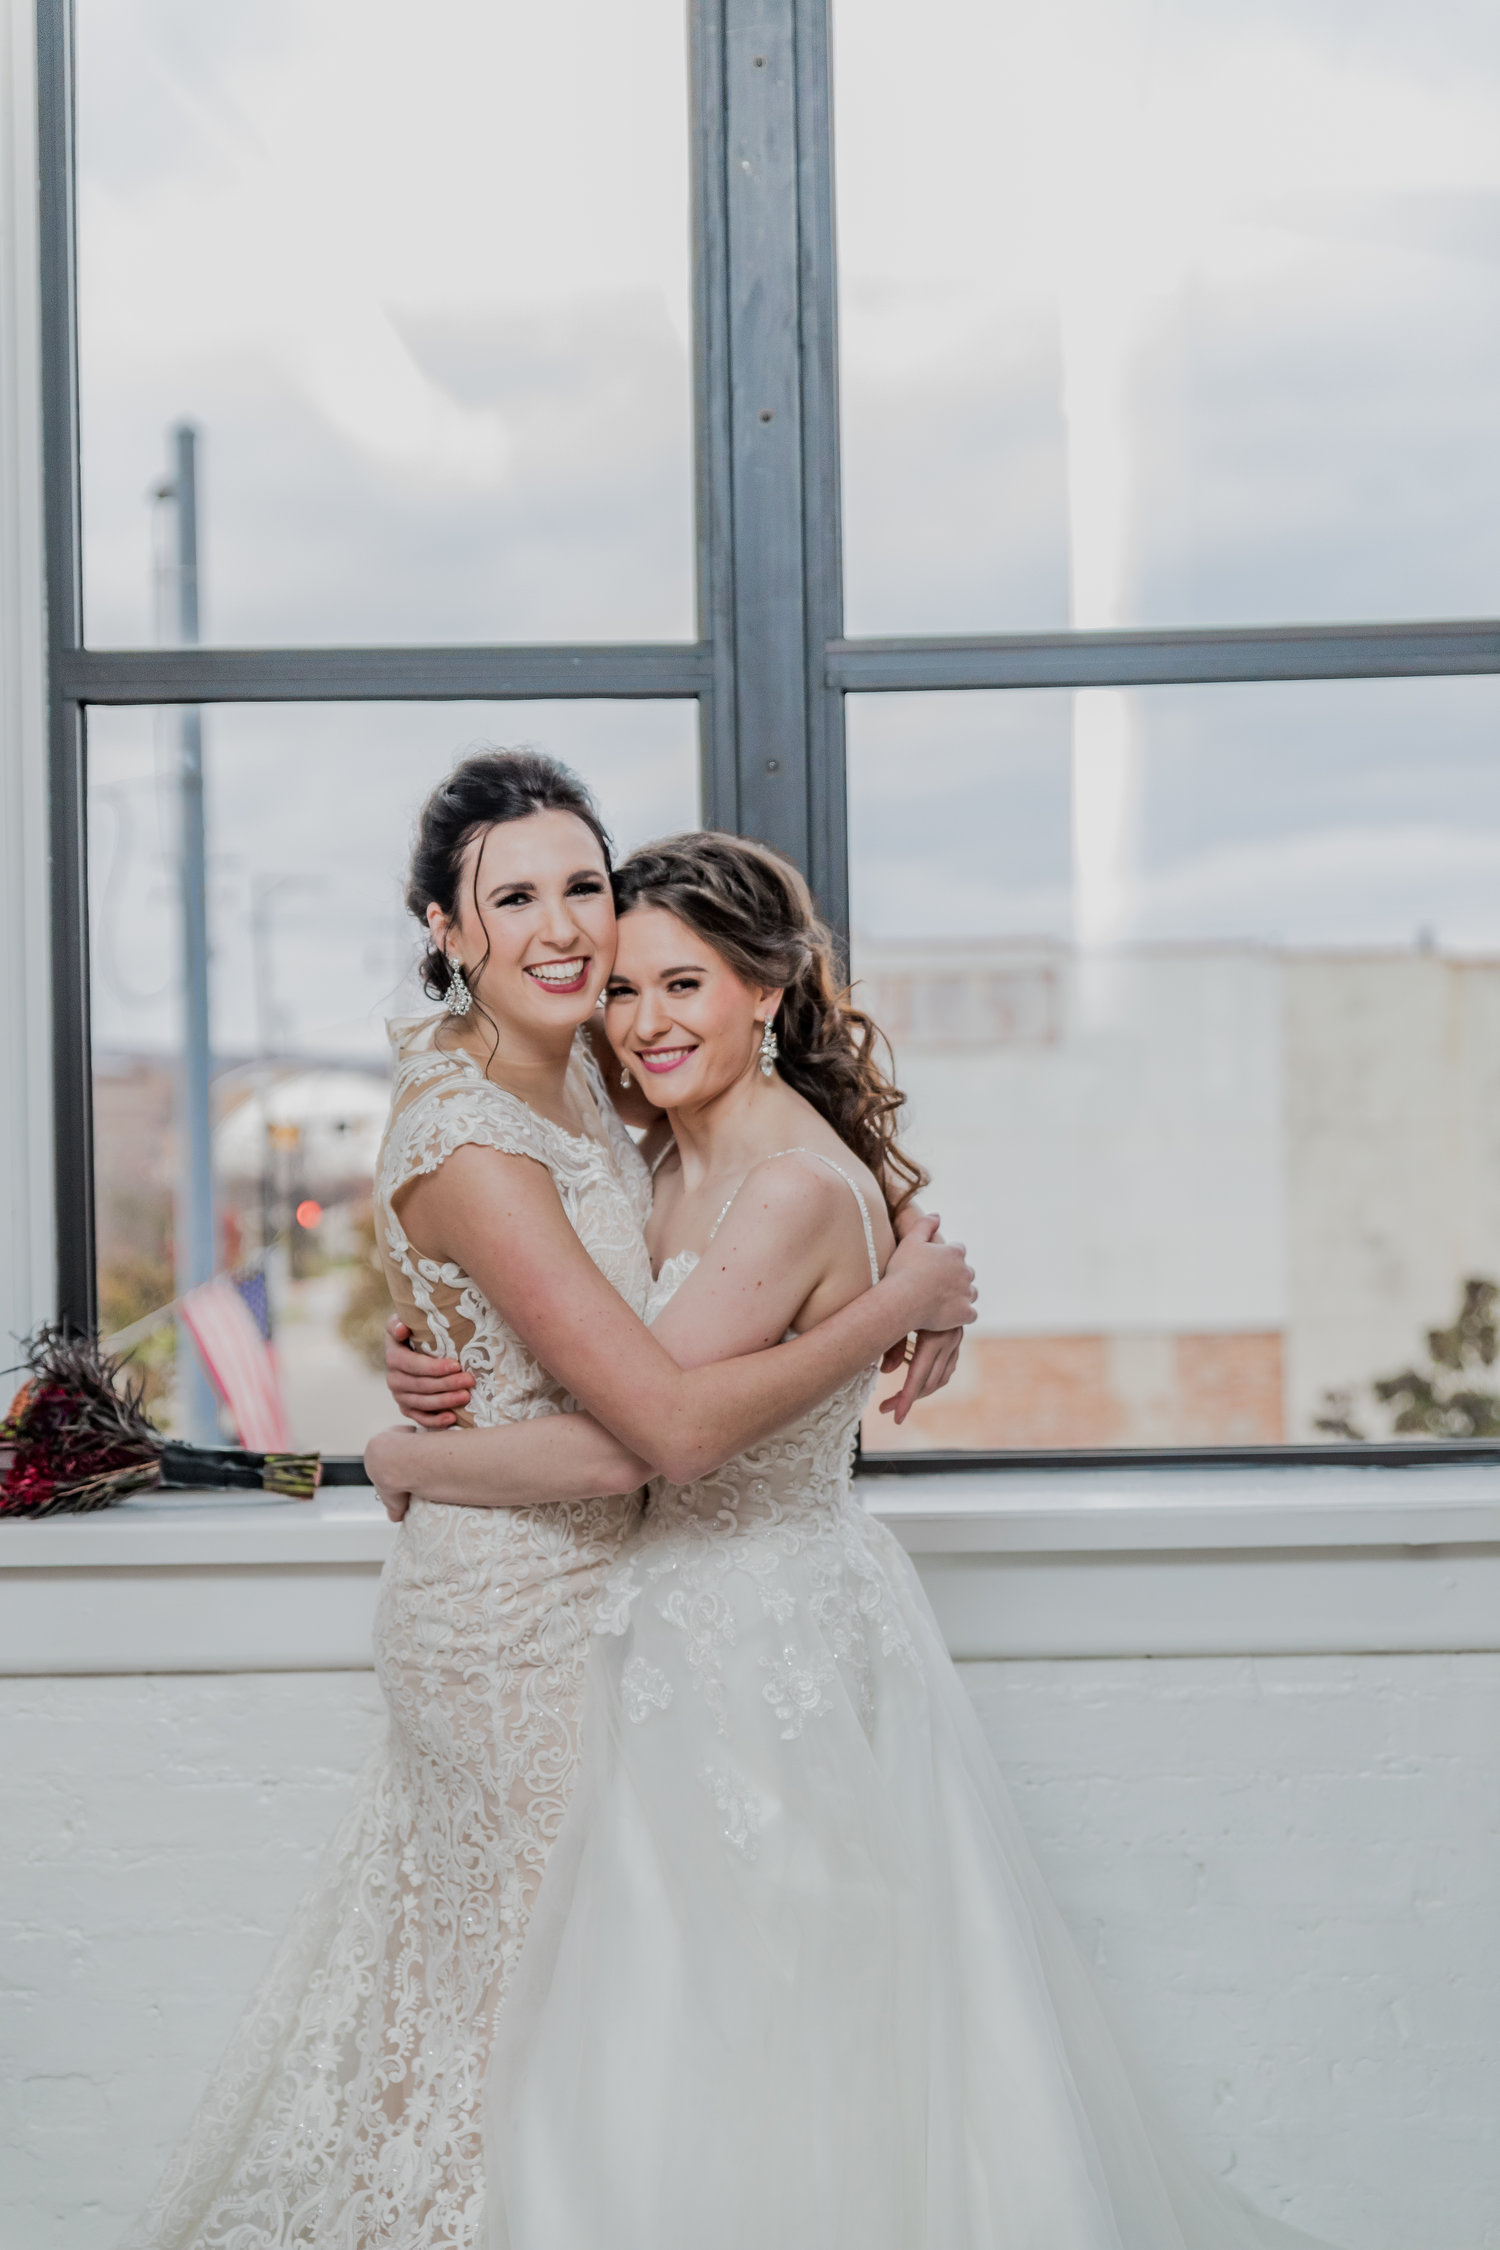 Two women in wedding dresses hugging each other.